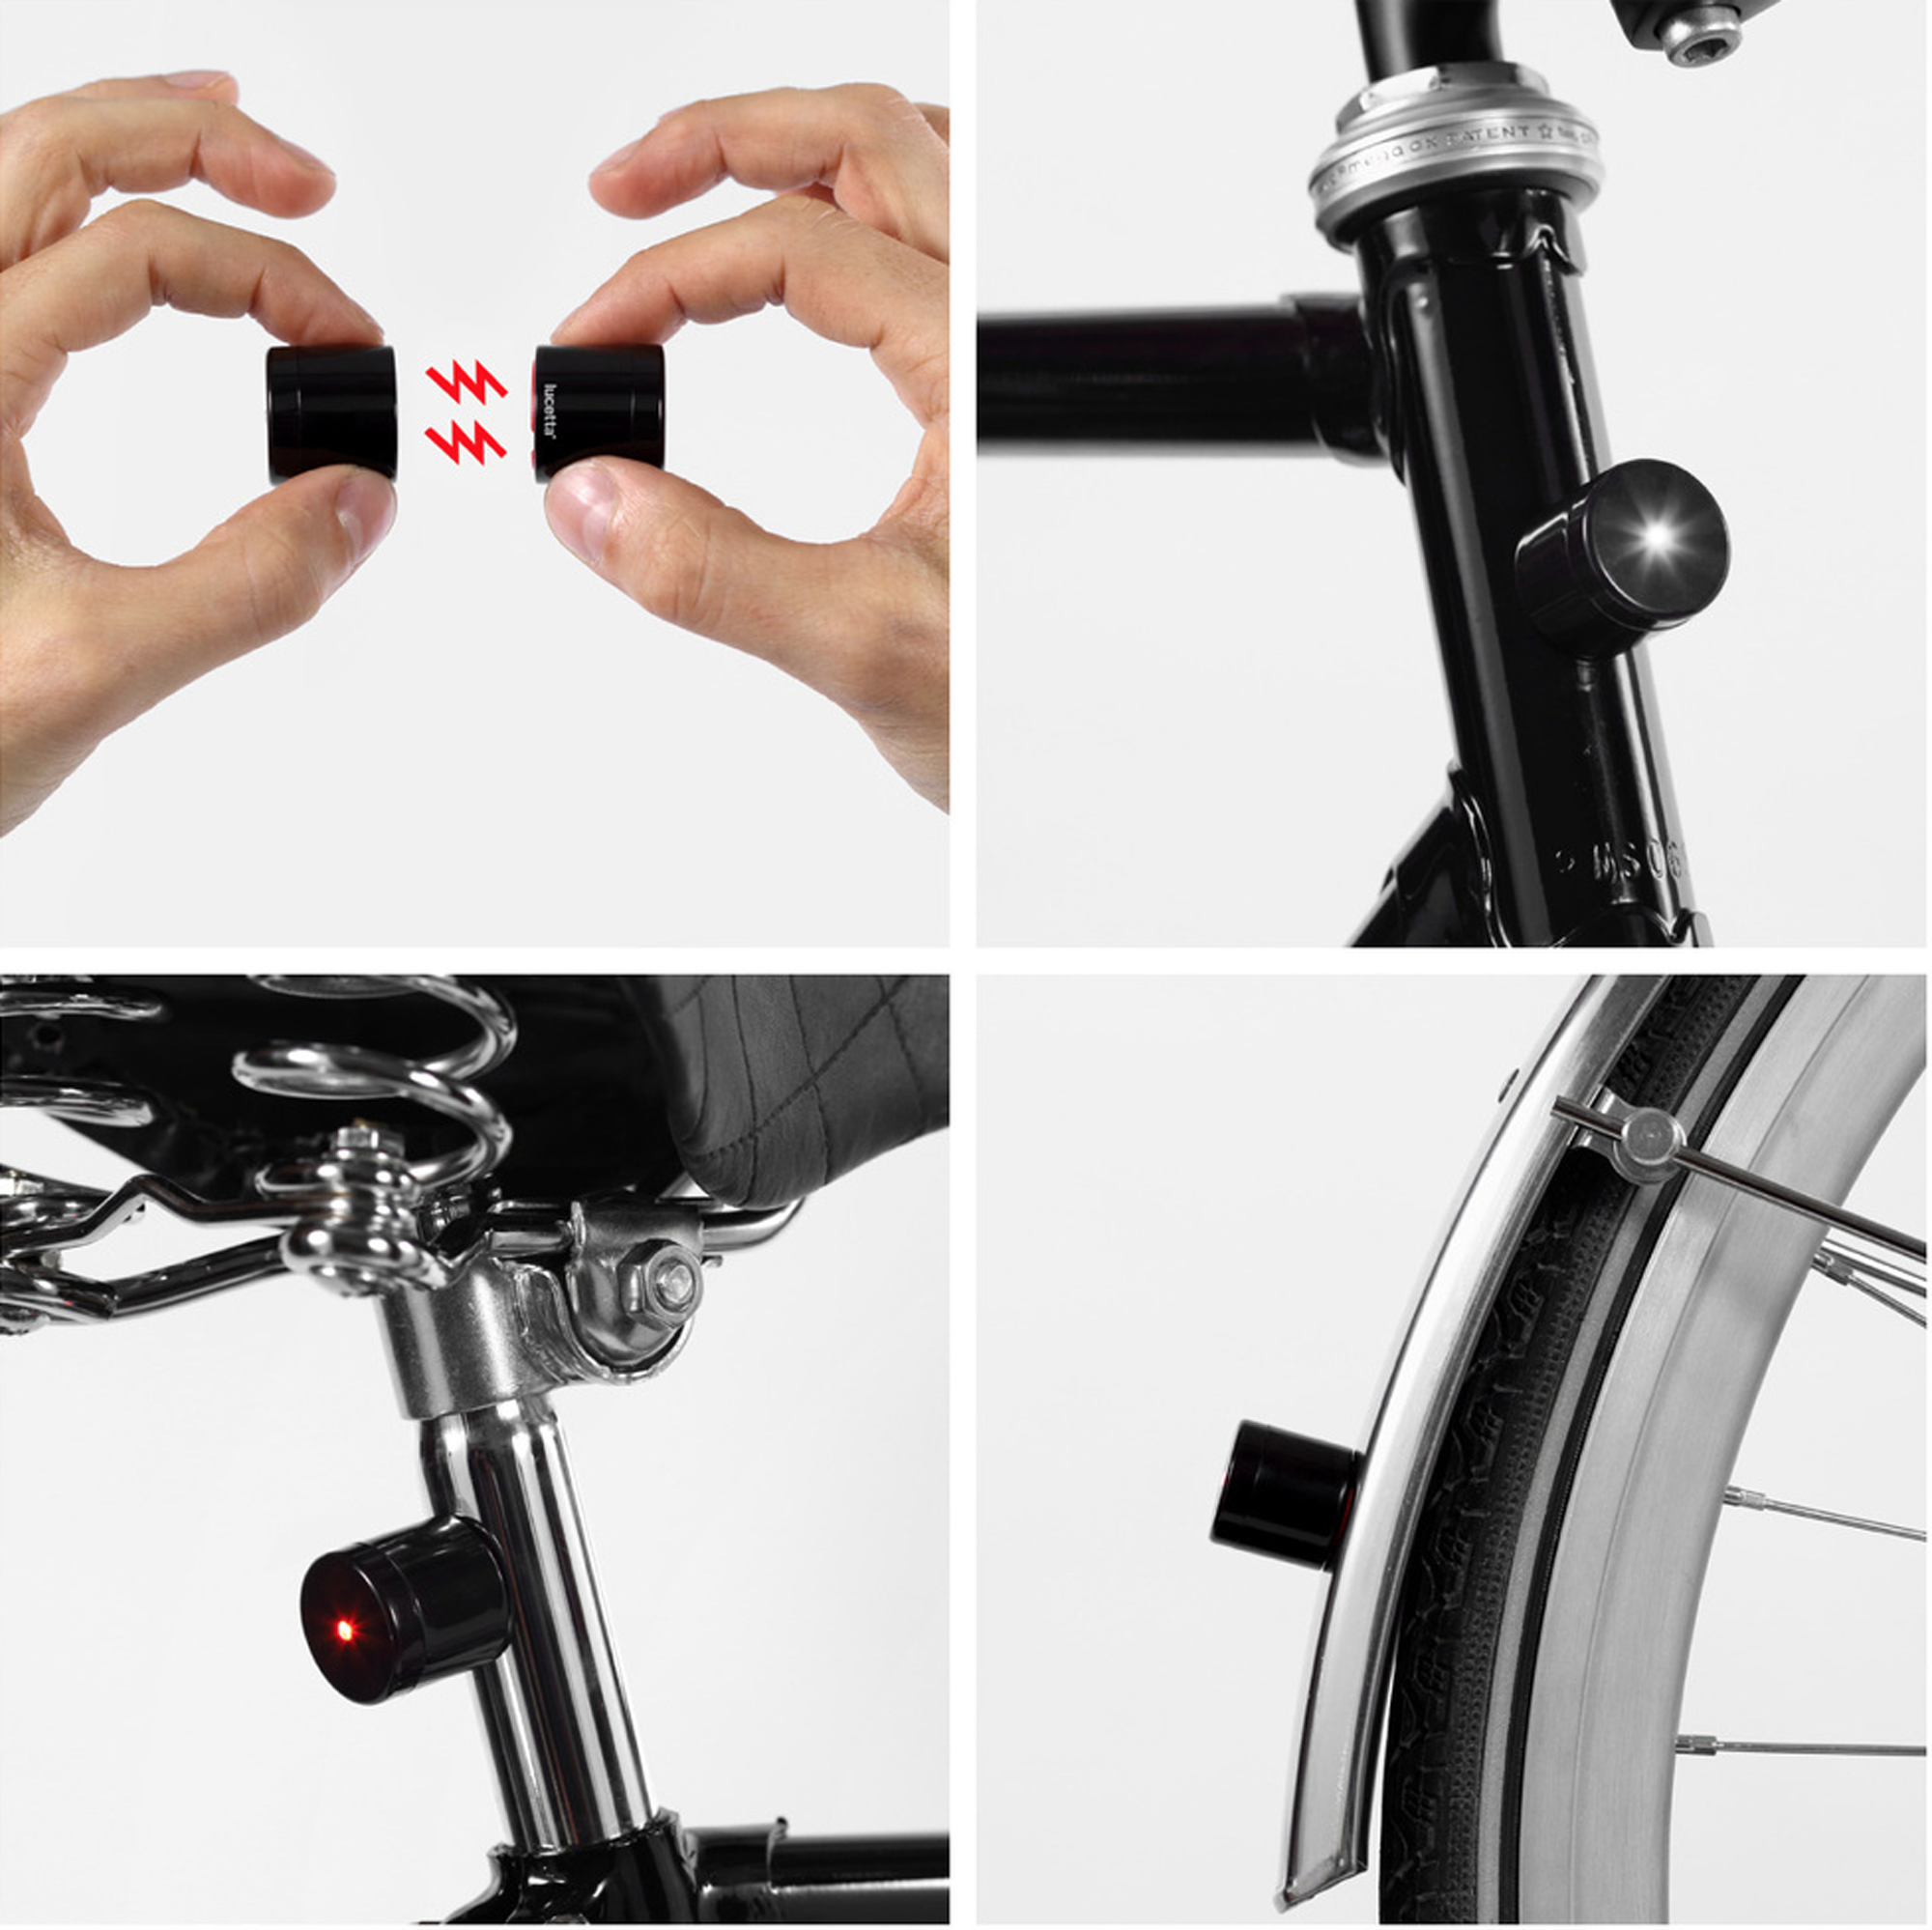 lucetta magnetic bicycle lights by pizzolorusso. – DesignApplause